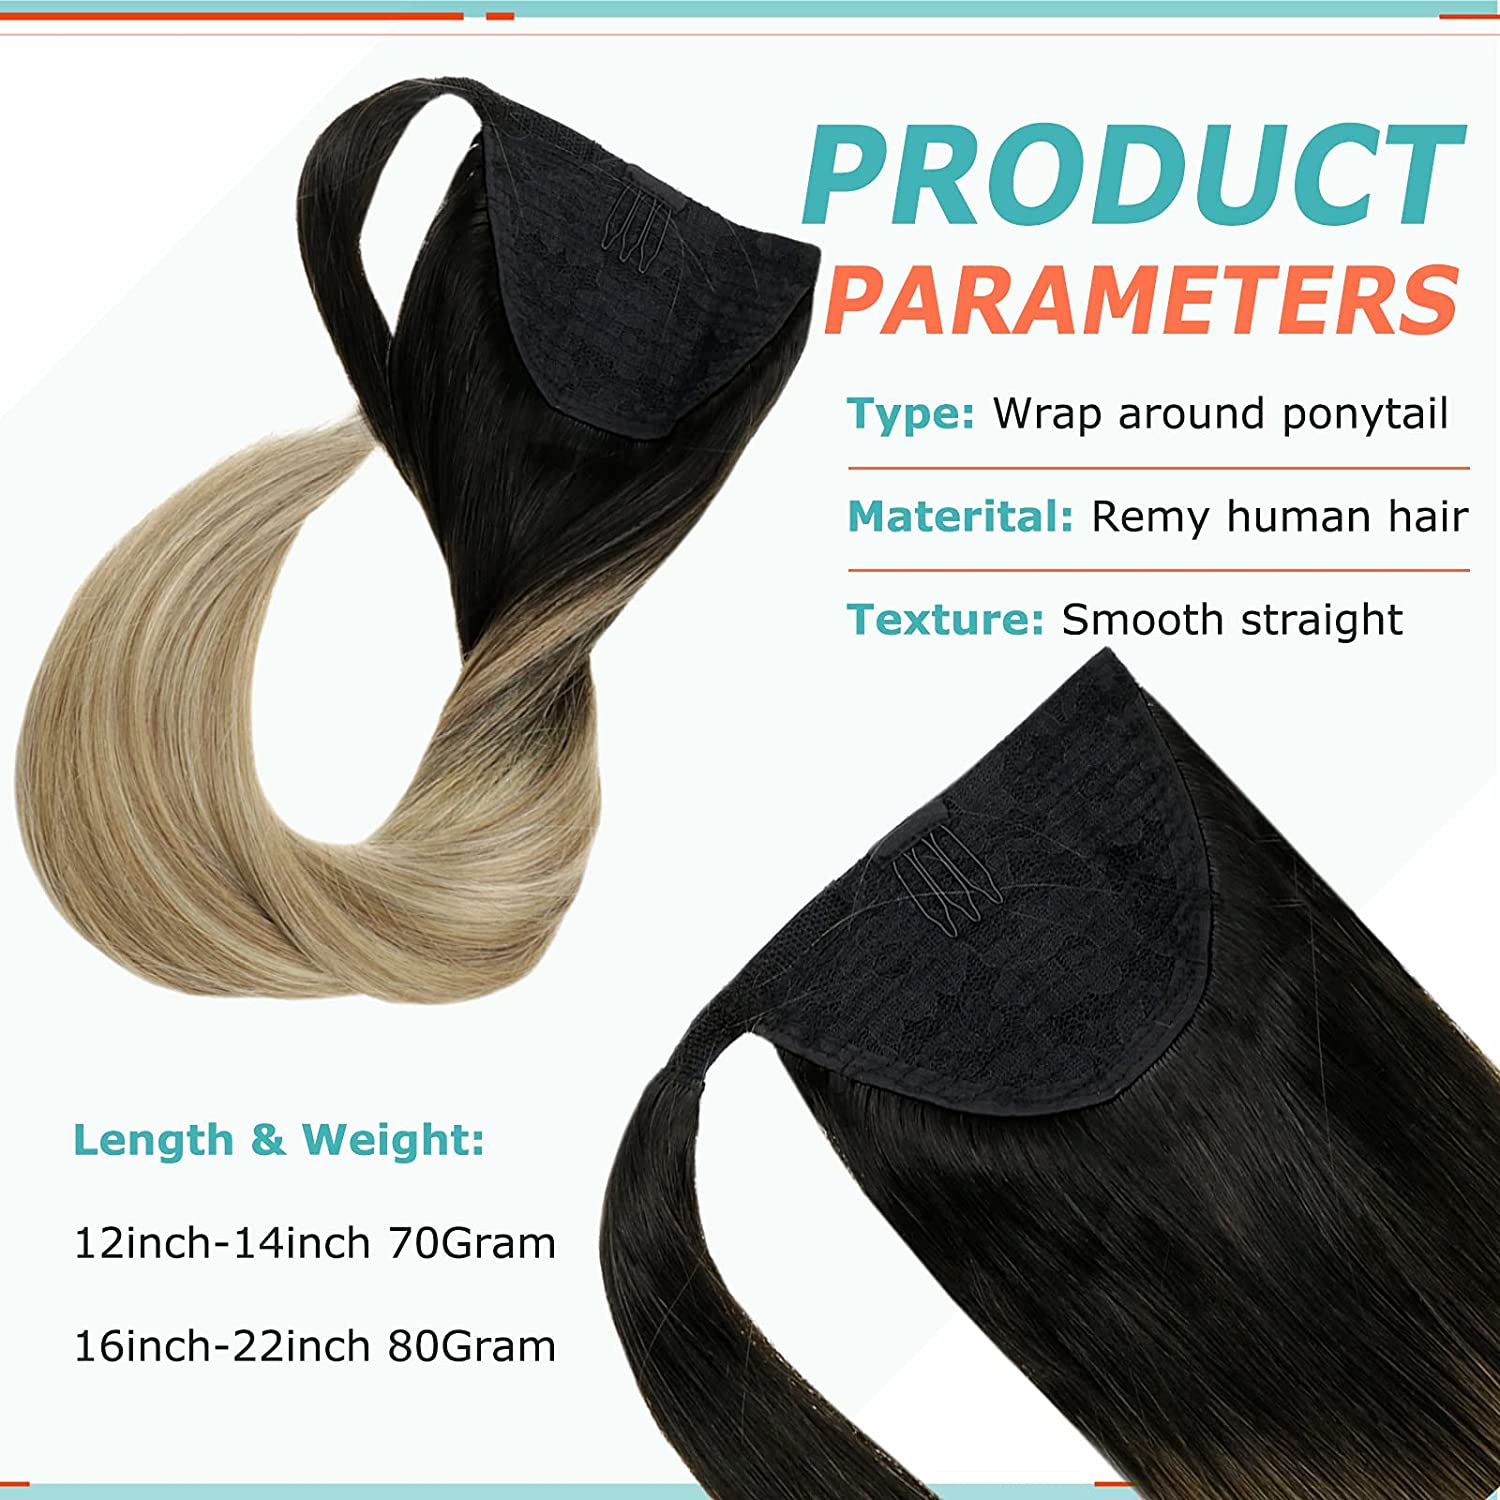 Ponytail 100% Remy Human Hair Extensions ombre(#1B/8/22) - FShine Shop